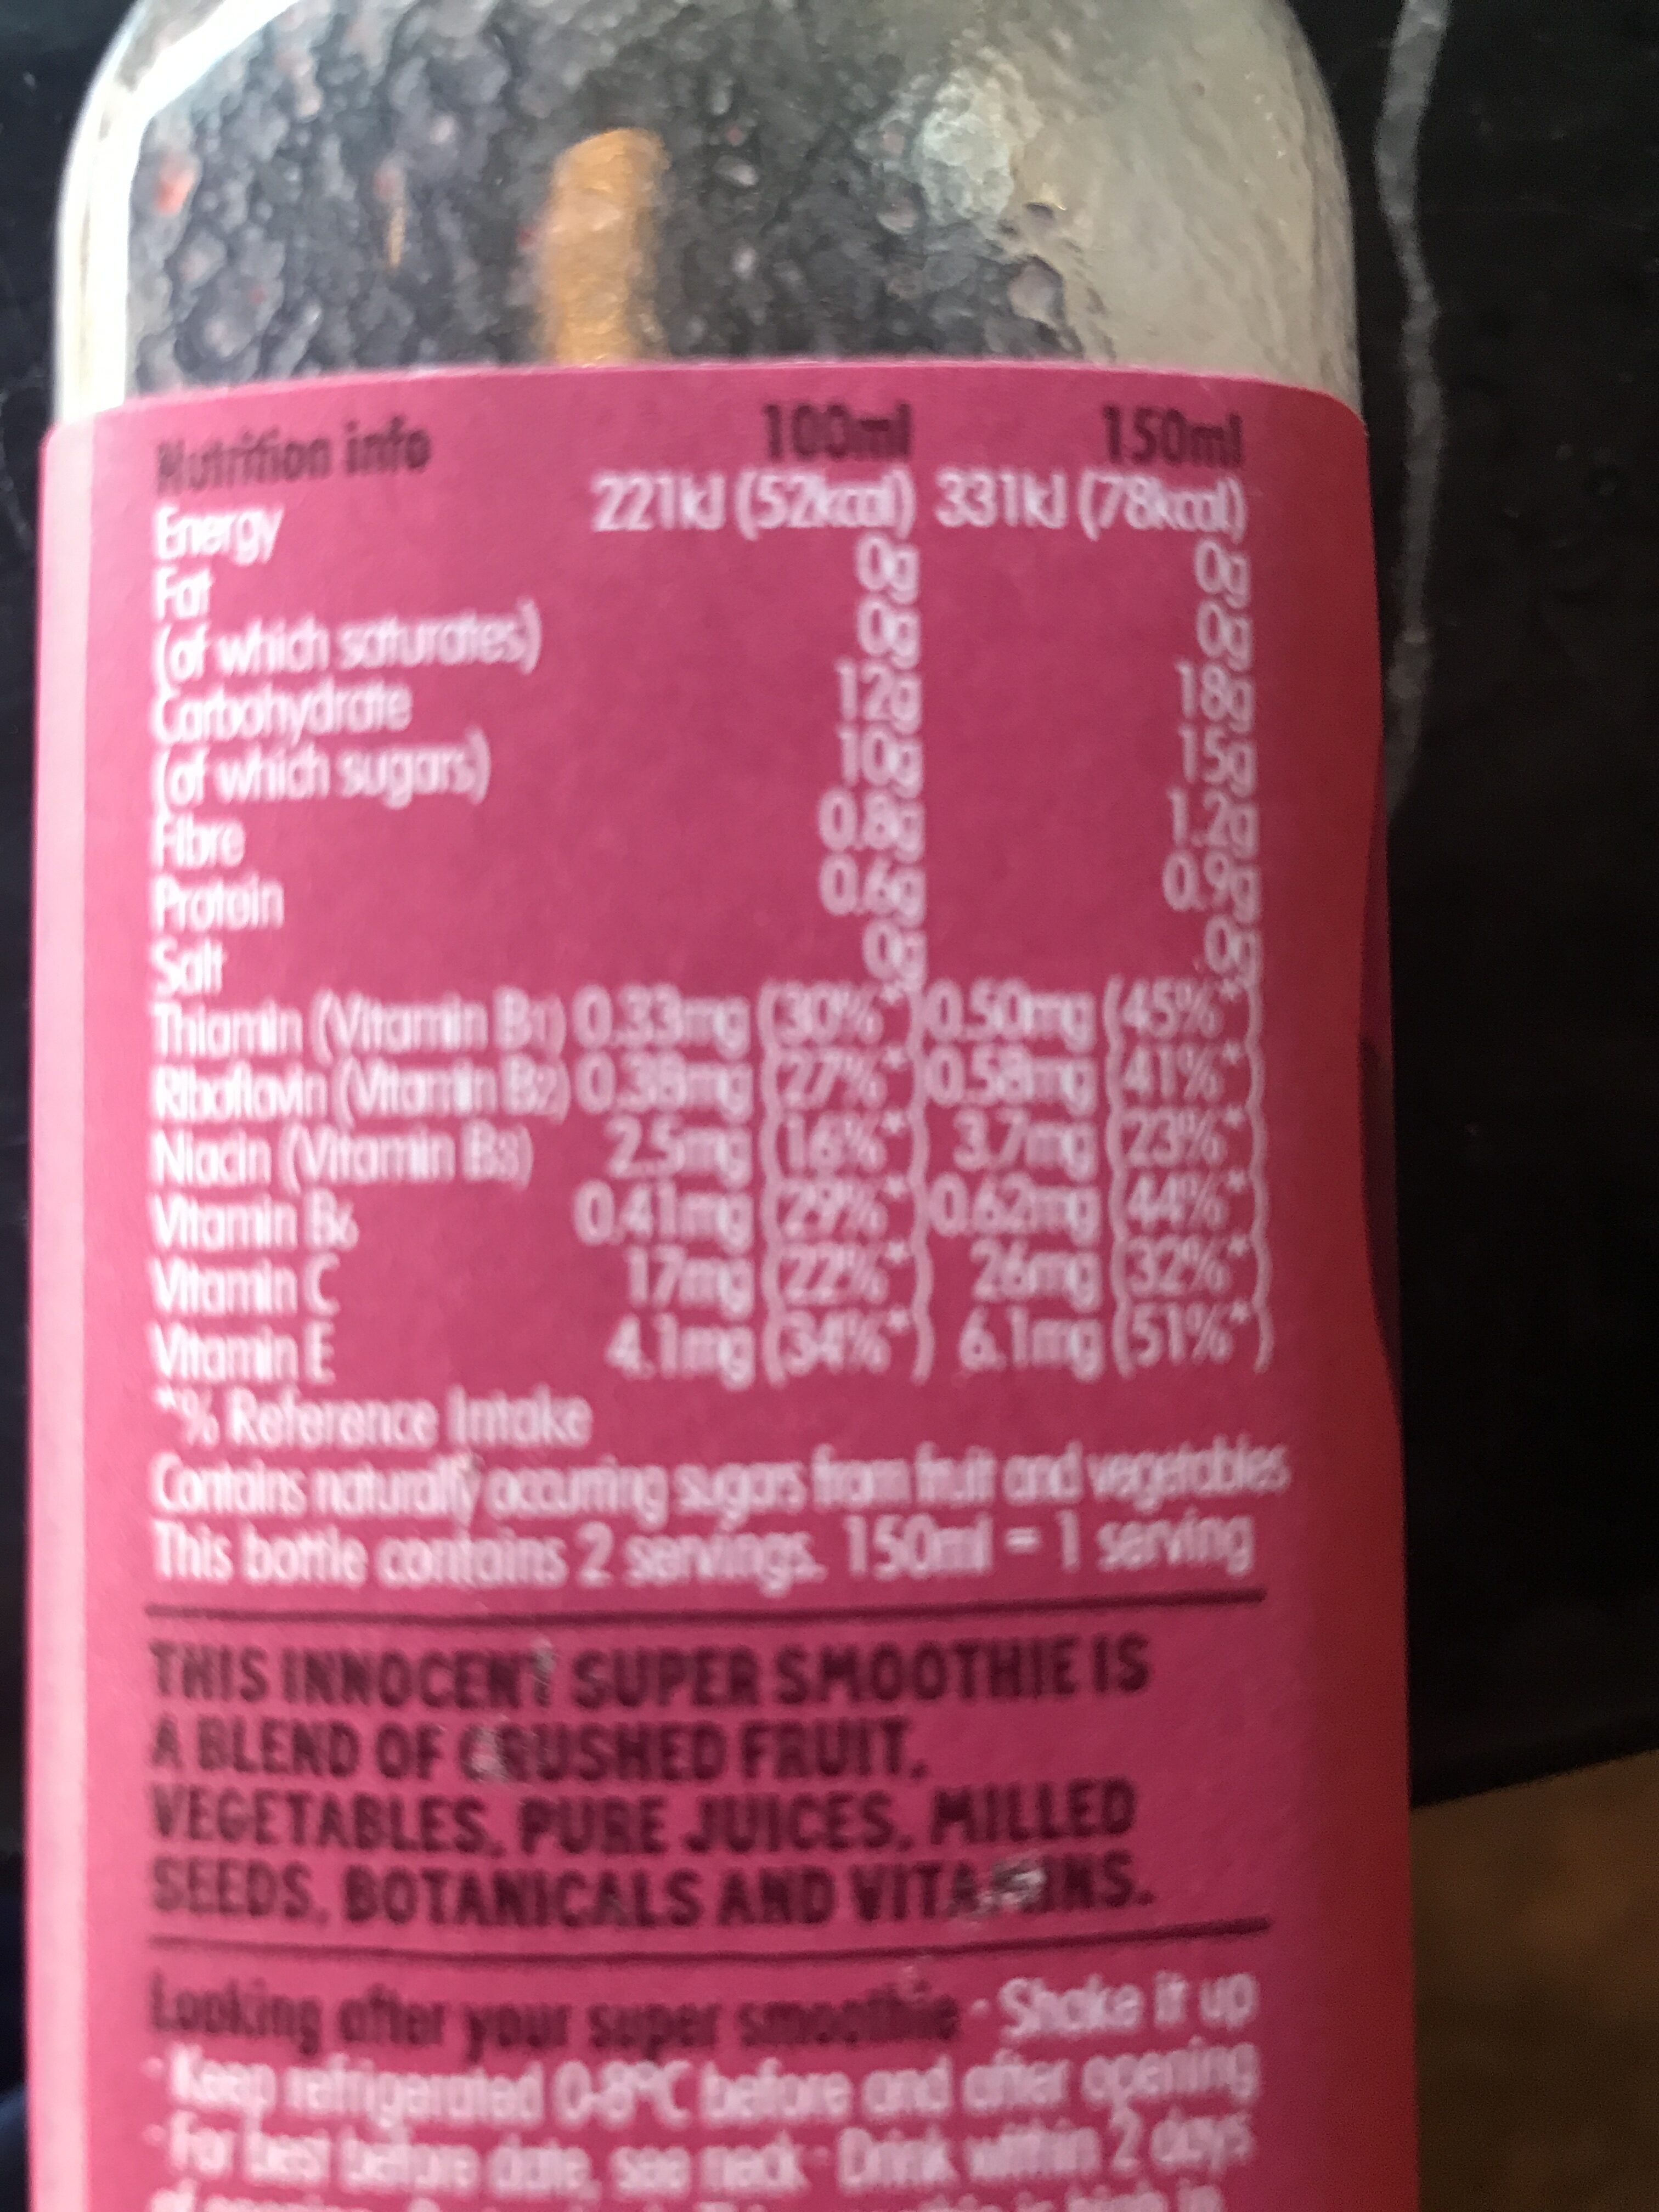 Energise Super smoothie - Nutrition facts